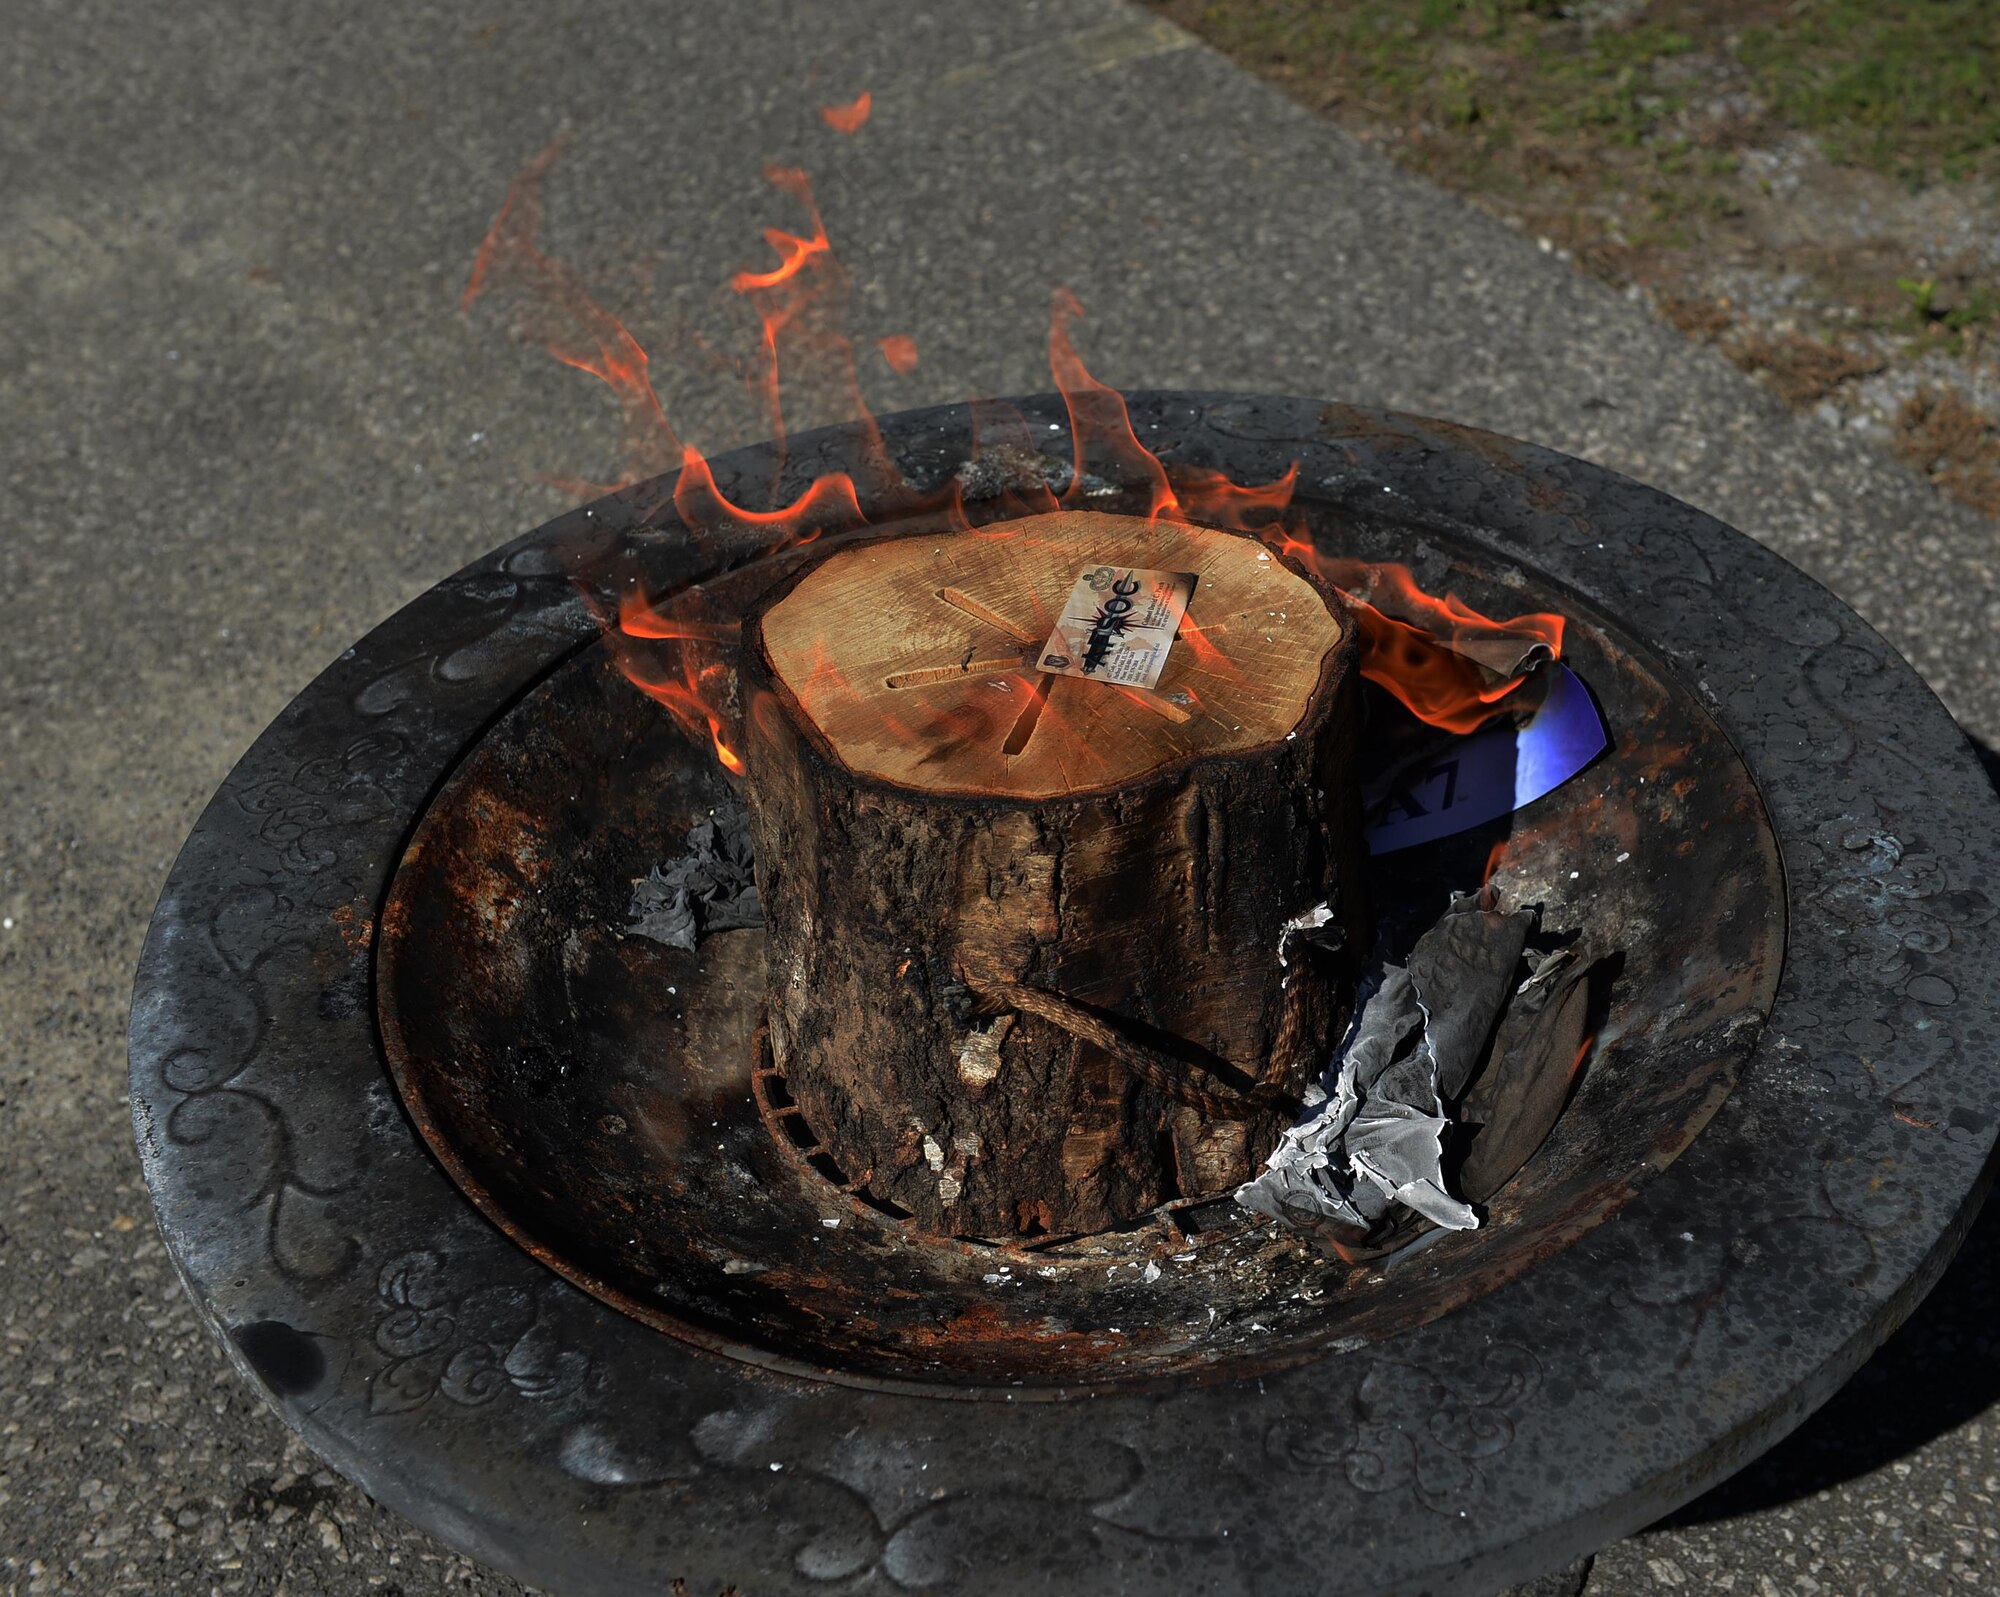 An A7 business card burns in a fire pit at Hurlburt Field, Fla., Sept. 30, 2016. Air Force Special Operations Command’s A4 directorate has absorbed A7. “It doesn’t matter who is in charge, it’s about supporting the warfighter … supporting our Air Commandos,” said Col. David Piech, AFSOC’s last A7 director, at the Irish Wake-themed ceremony. (U.S. Air Force photo/Staff Sgt. Melanie Holochwost)